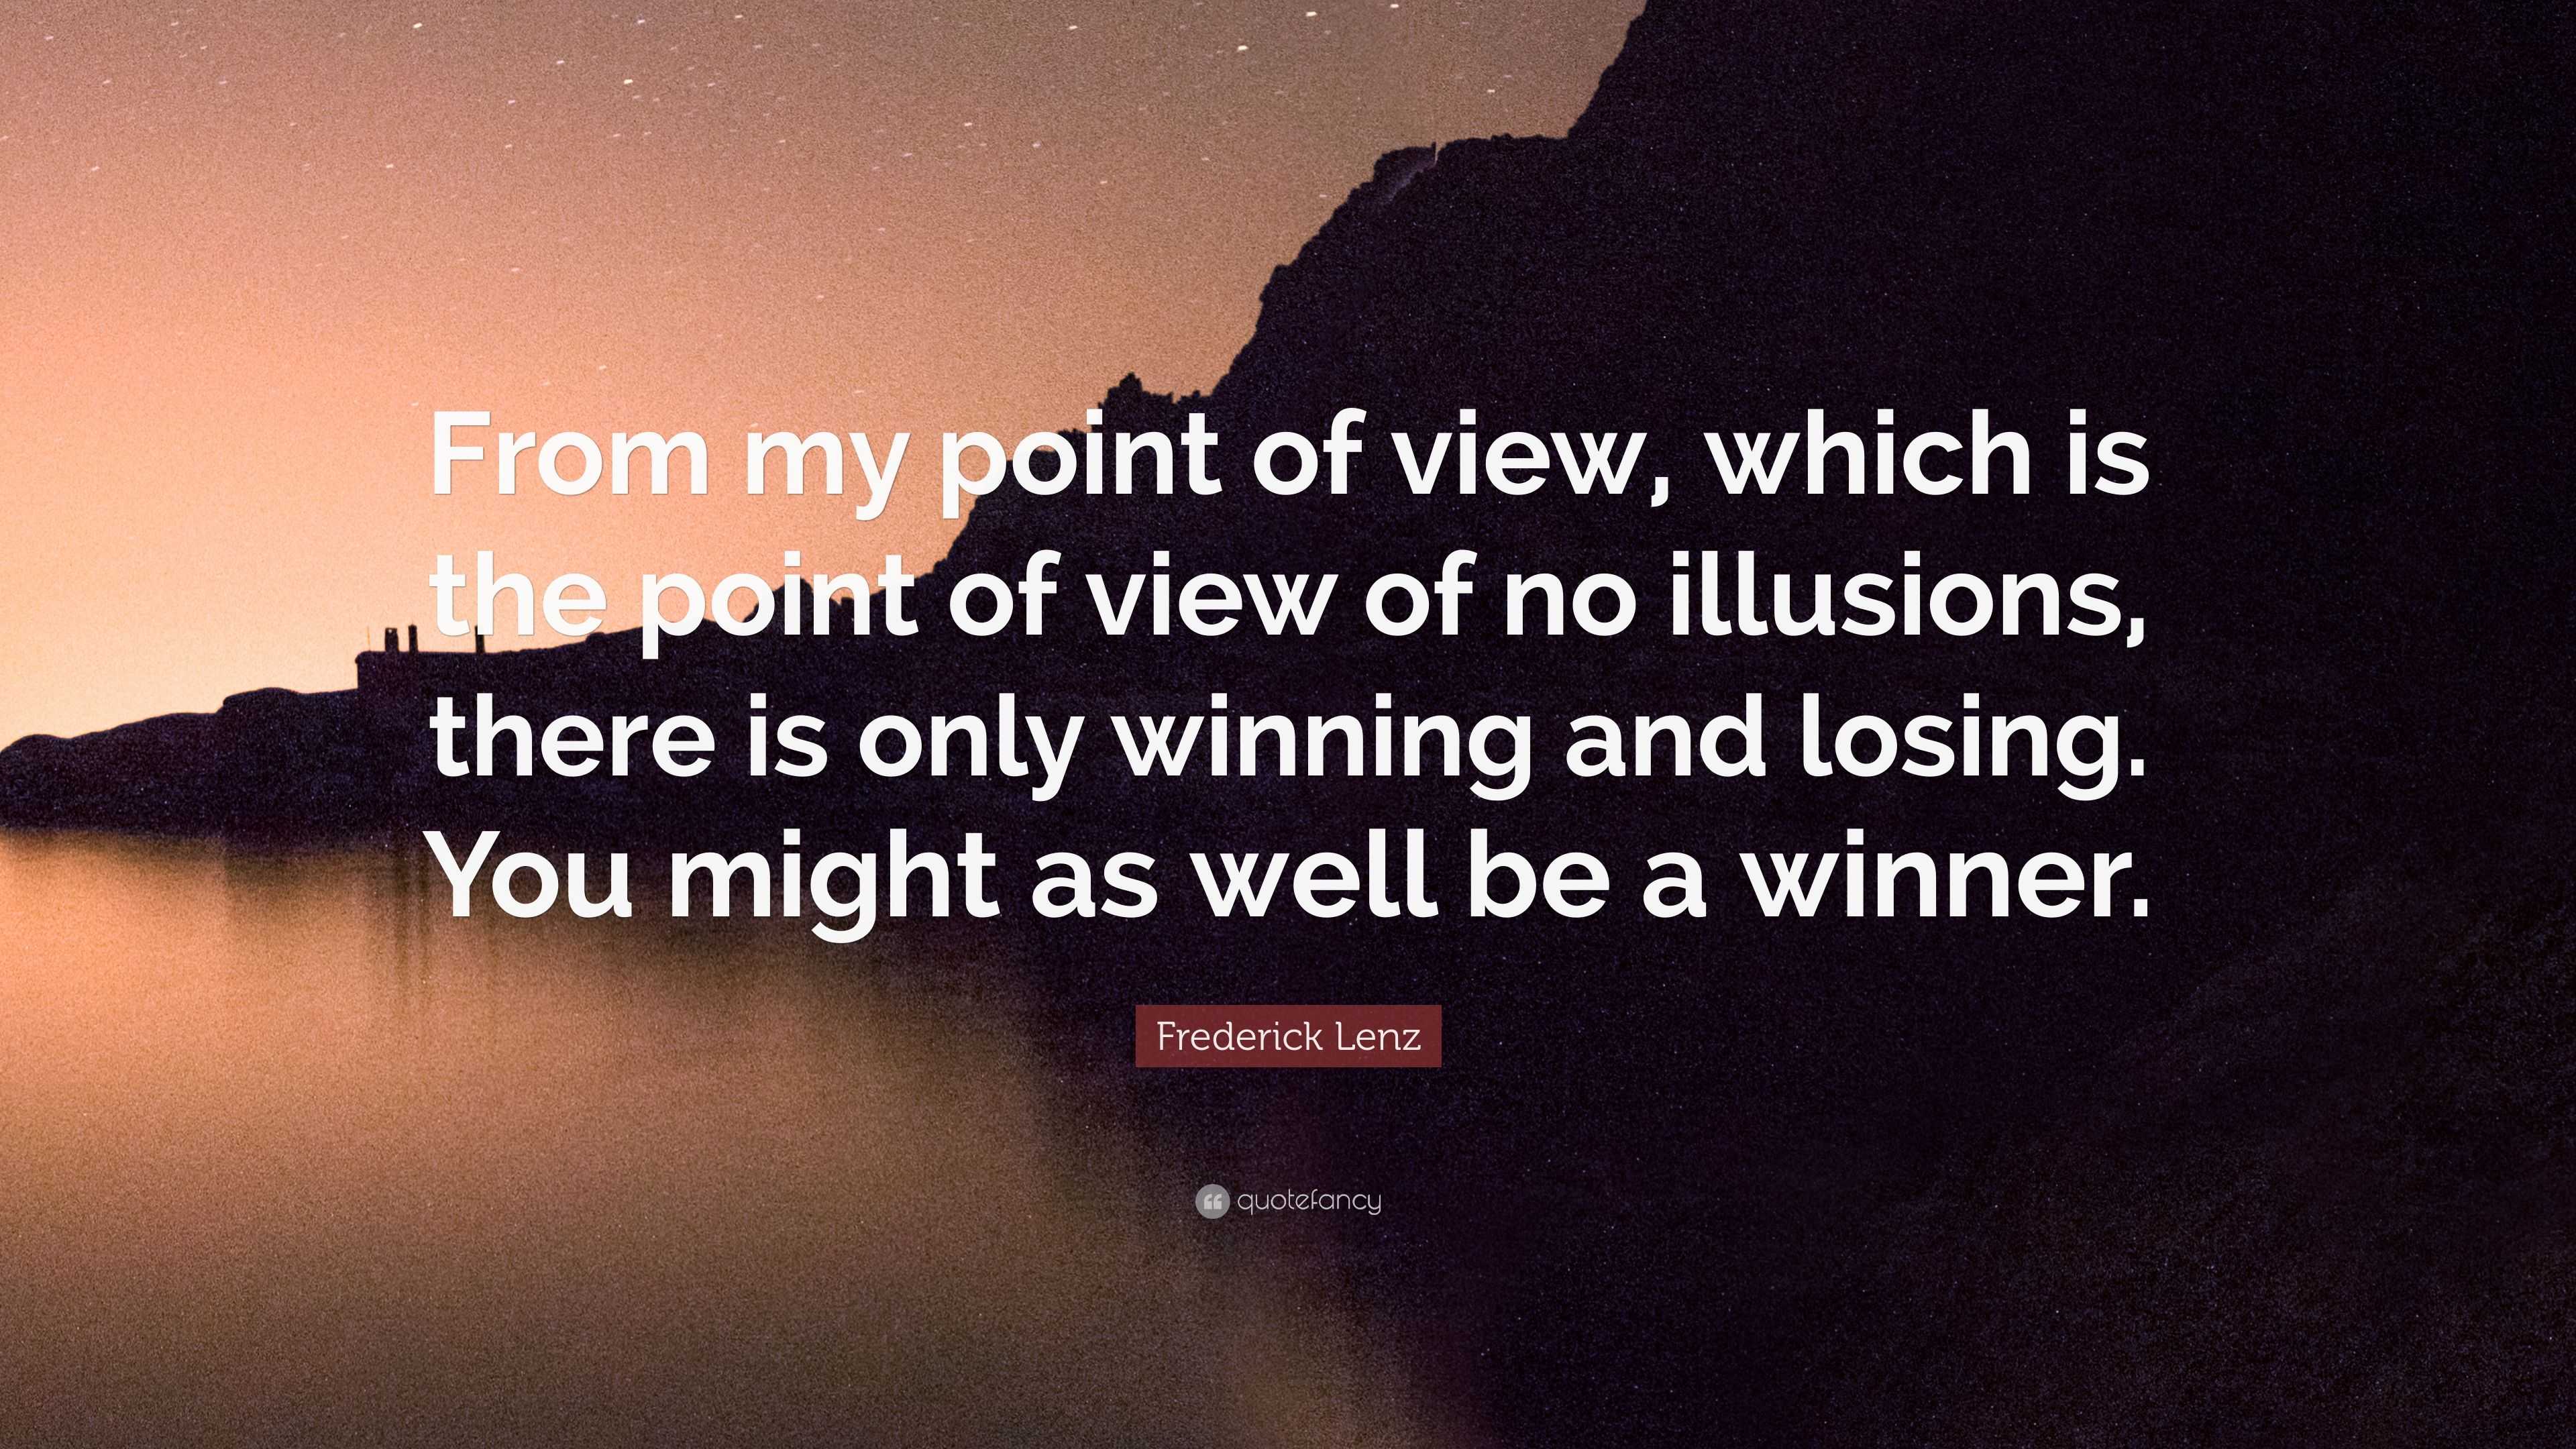 Frederick Lenz Quote “from My Point Of View Which Is The Point Of